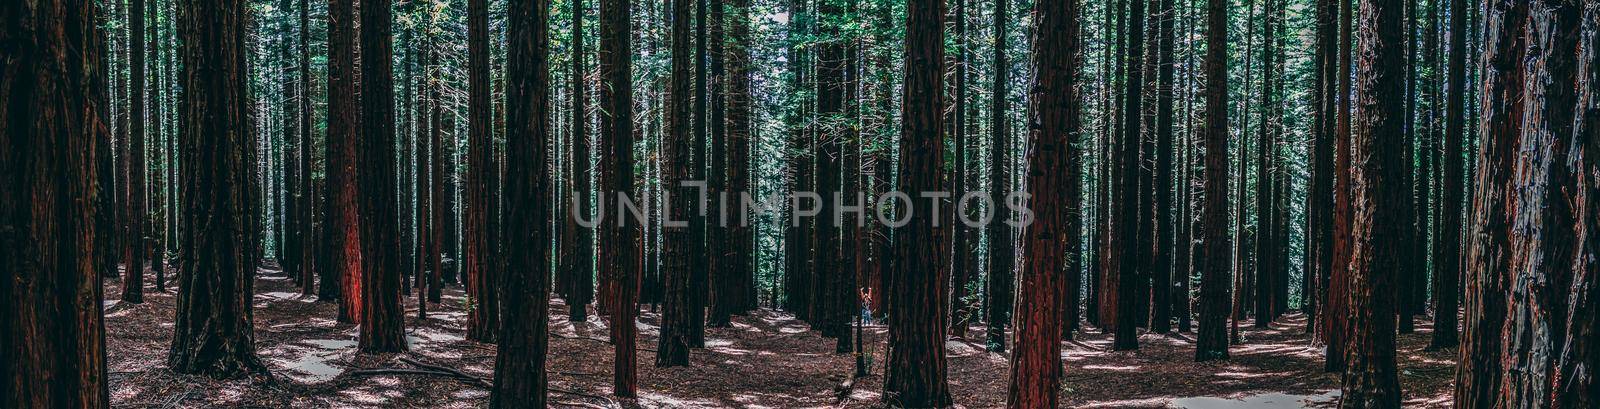 Rows of trees at the Redwood Forest is a tourist Icon for nature lovers and for Photography. California Redwoods were planted in the 1930's, Warburton in the Yarra Valley. Melbourne, Australia.